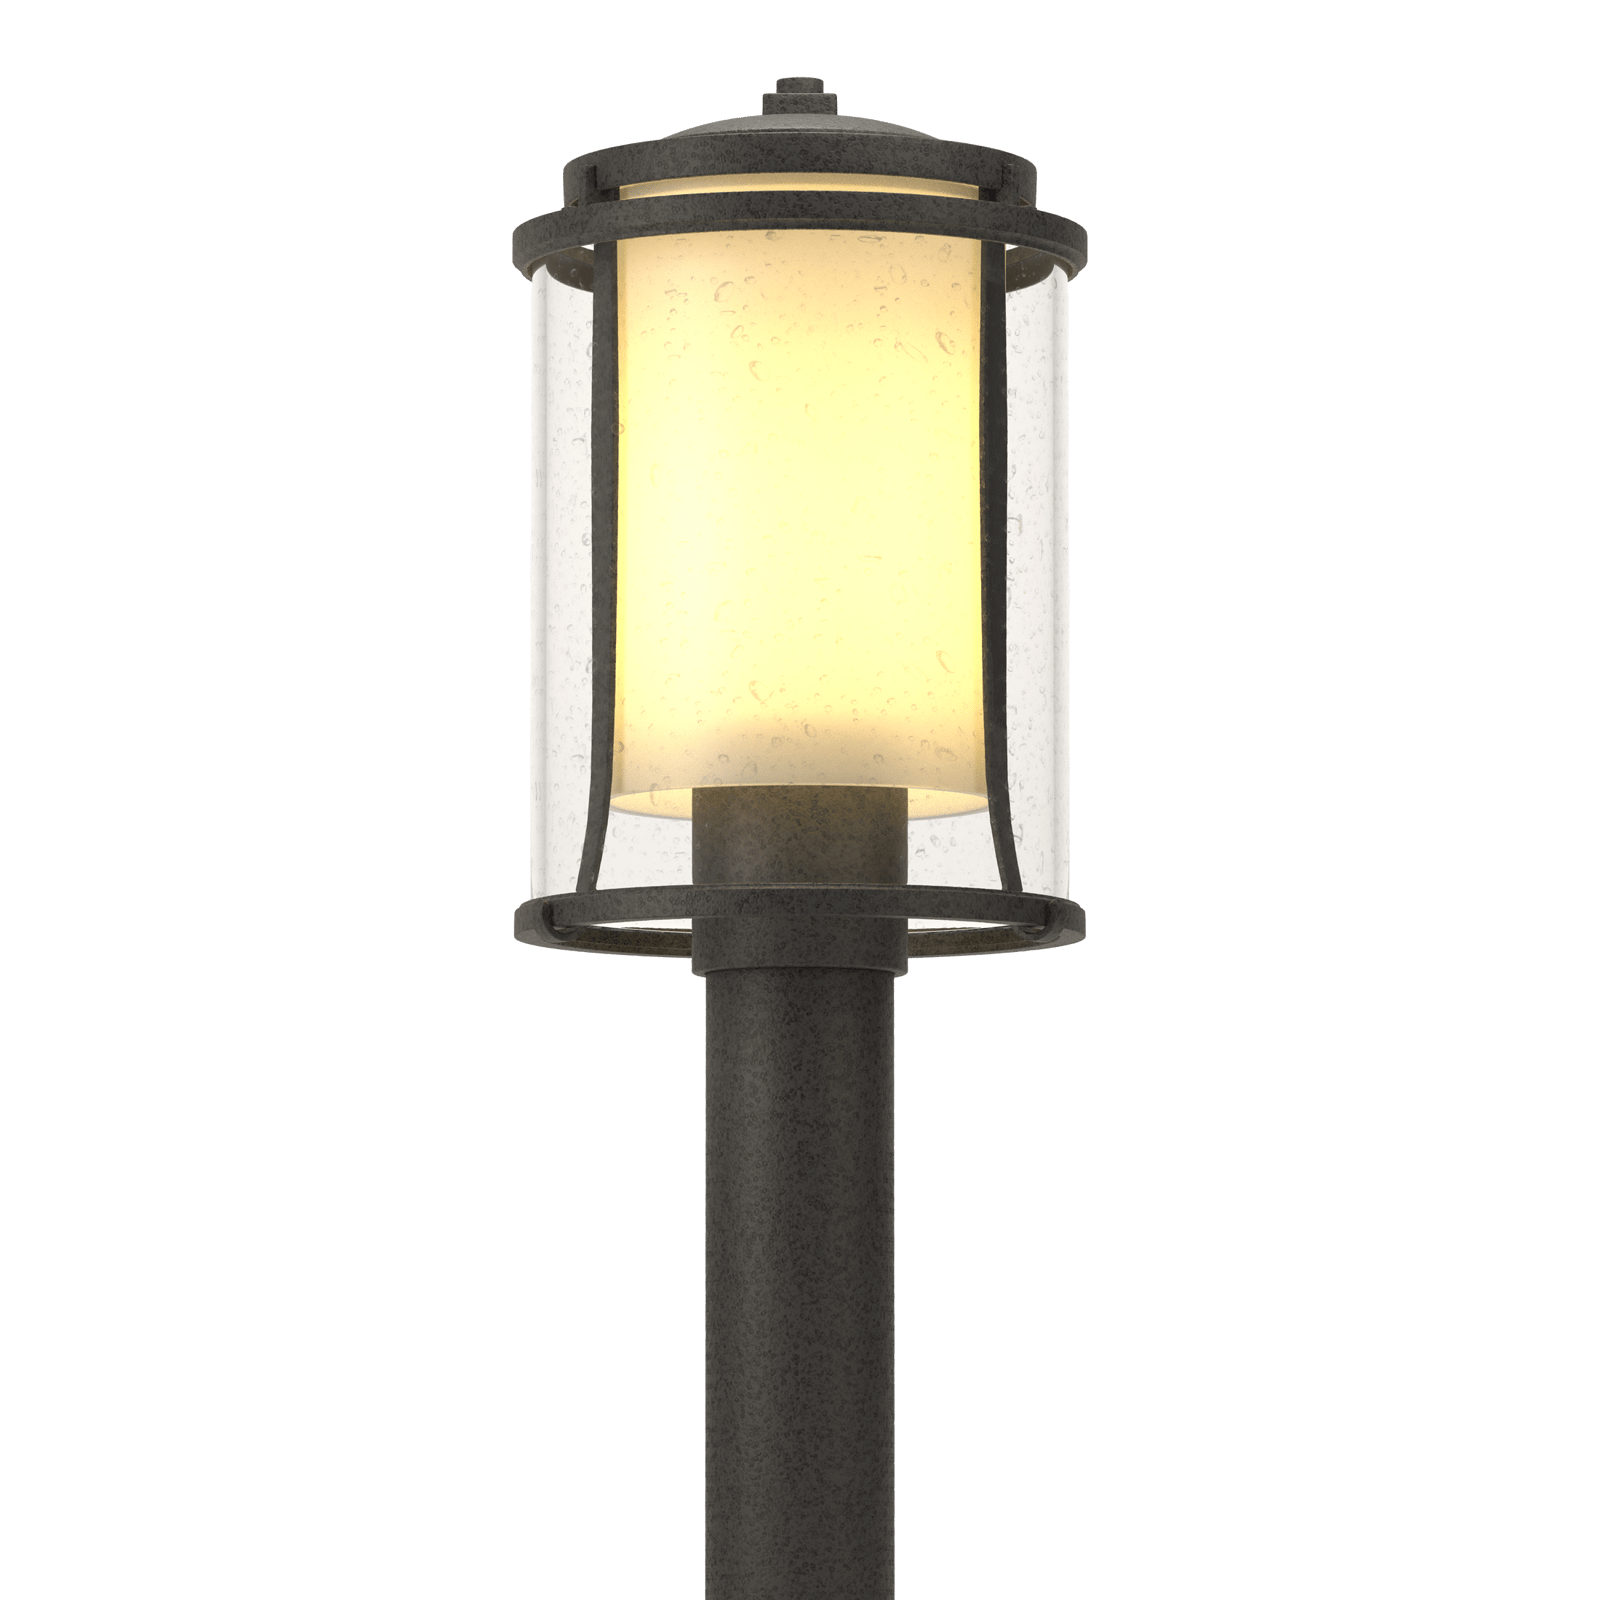 Hubbardton Forge Meridian Outdoor Post Light Outdoor l Post/Pier Mounts Hubbardton Forge Coastal Natural Iron Seeded Glass with Opal Diffuser (ZS) 